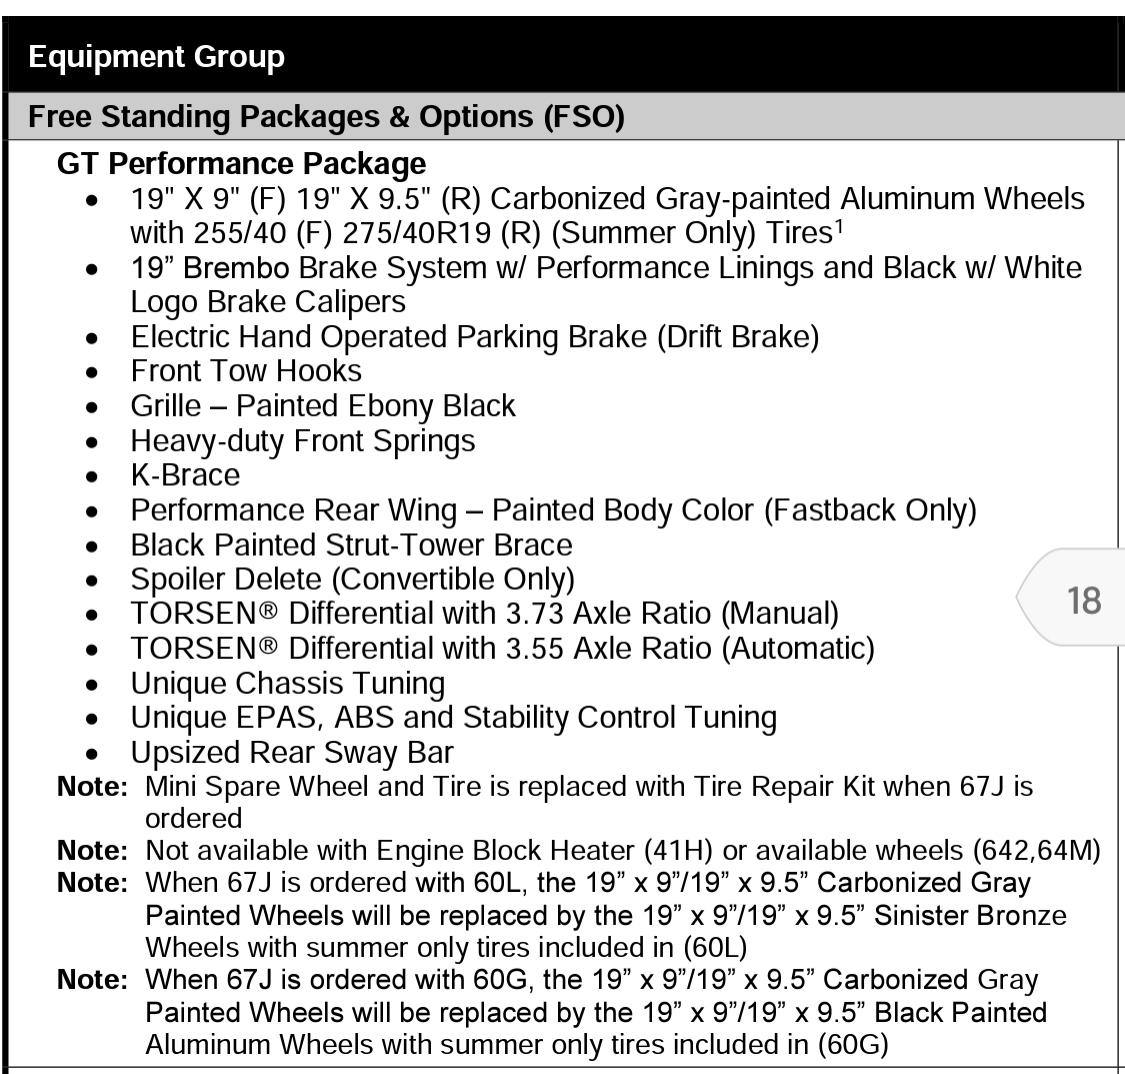 S650 Mustang Performance Package specifications? IMG_5887